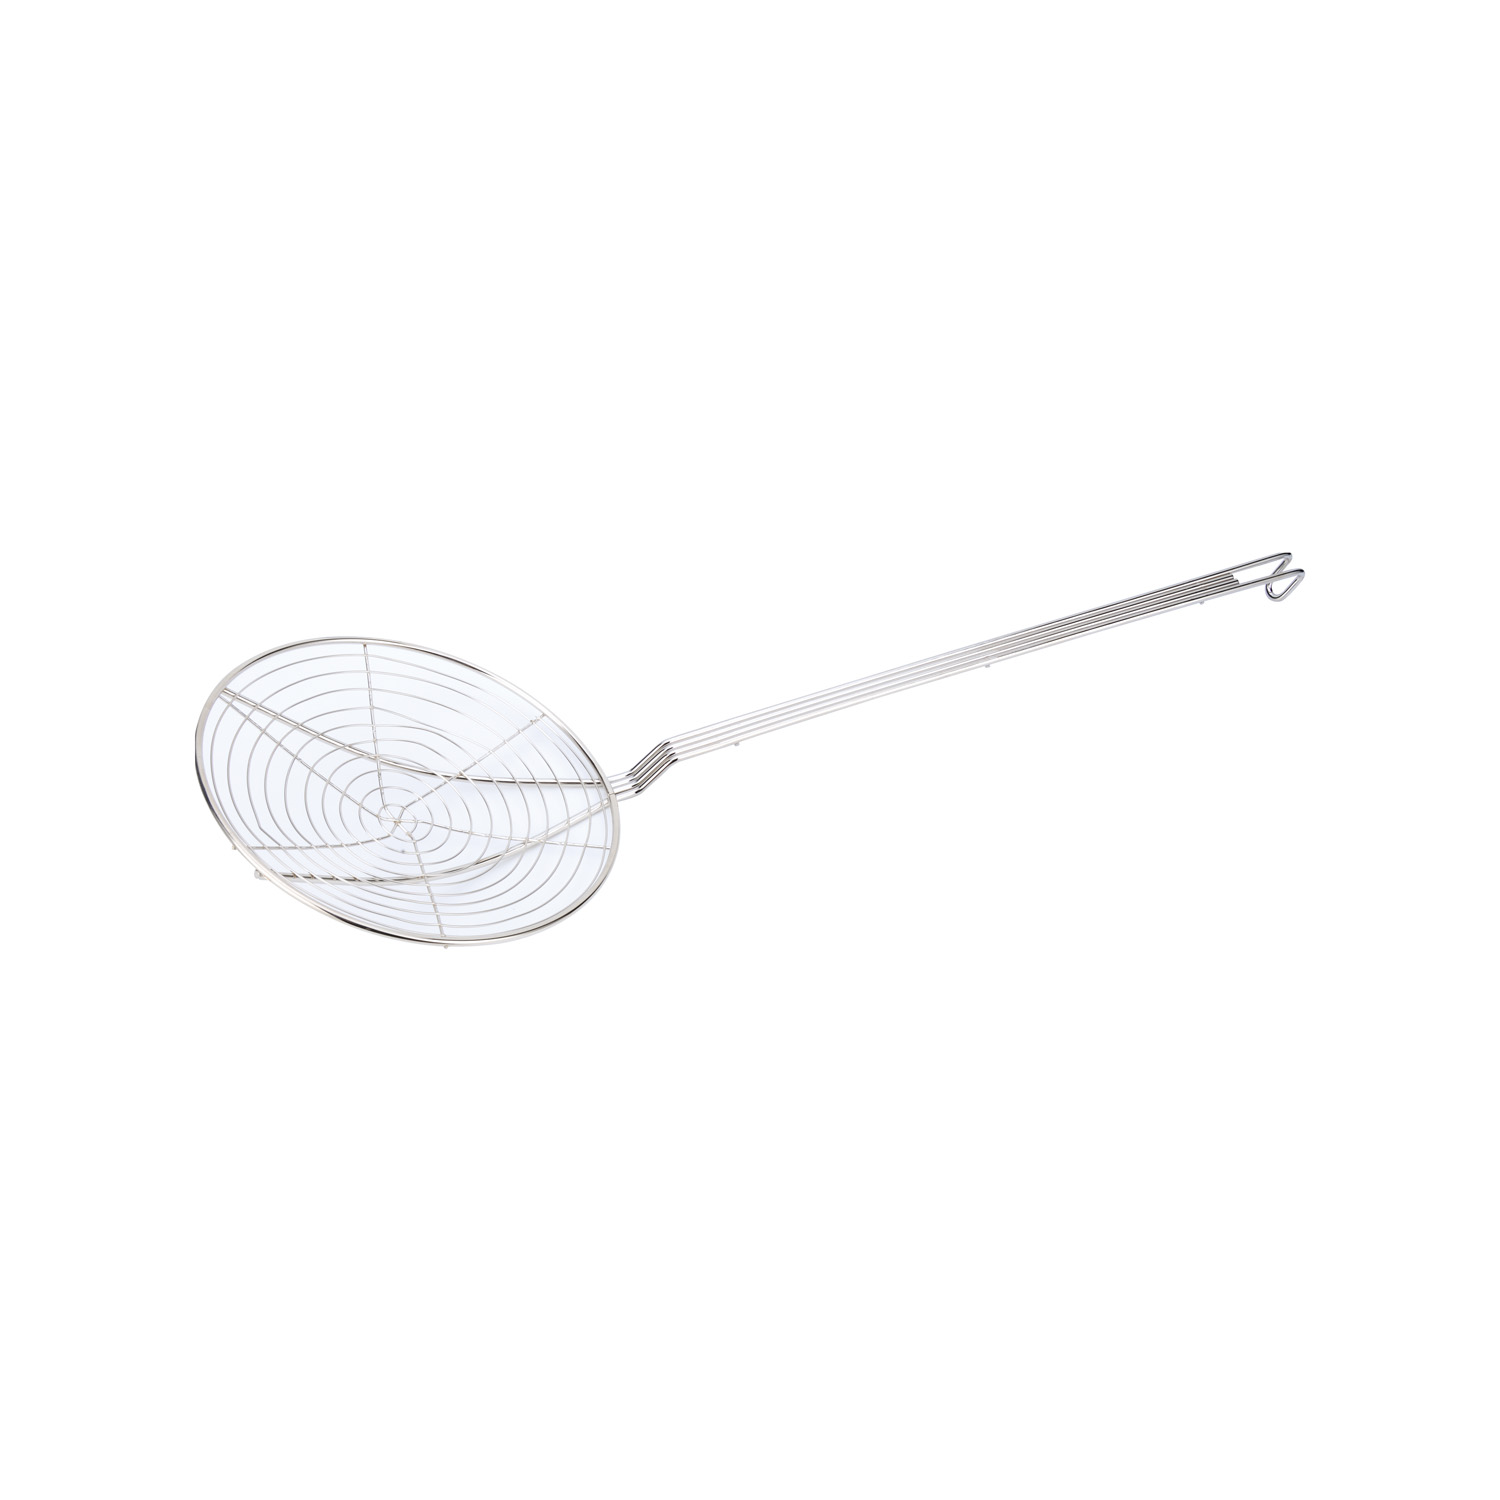 CAC China SKSP-09 Spiral Nickel-Plated Wire Skimmer 9" Dia